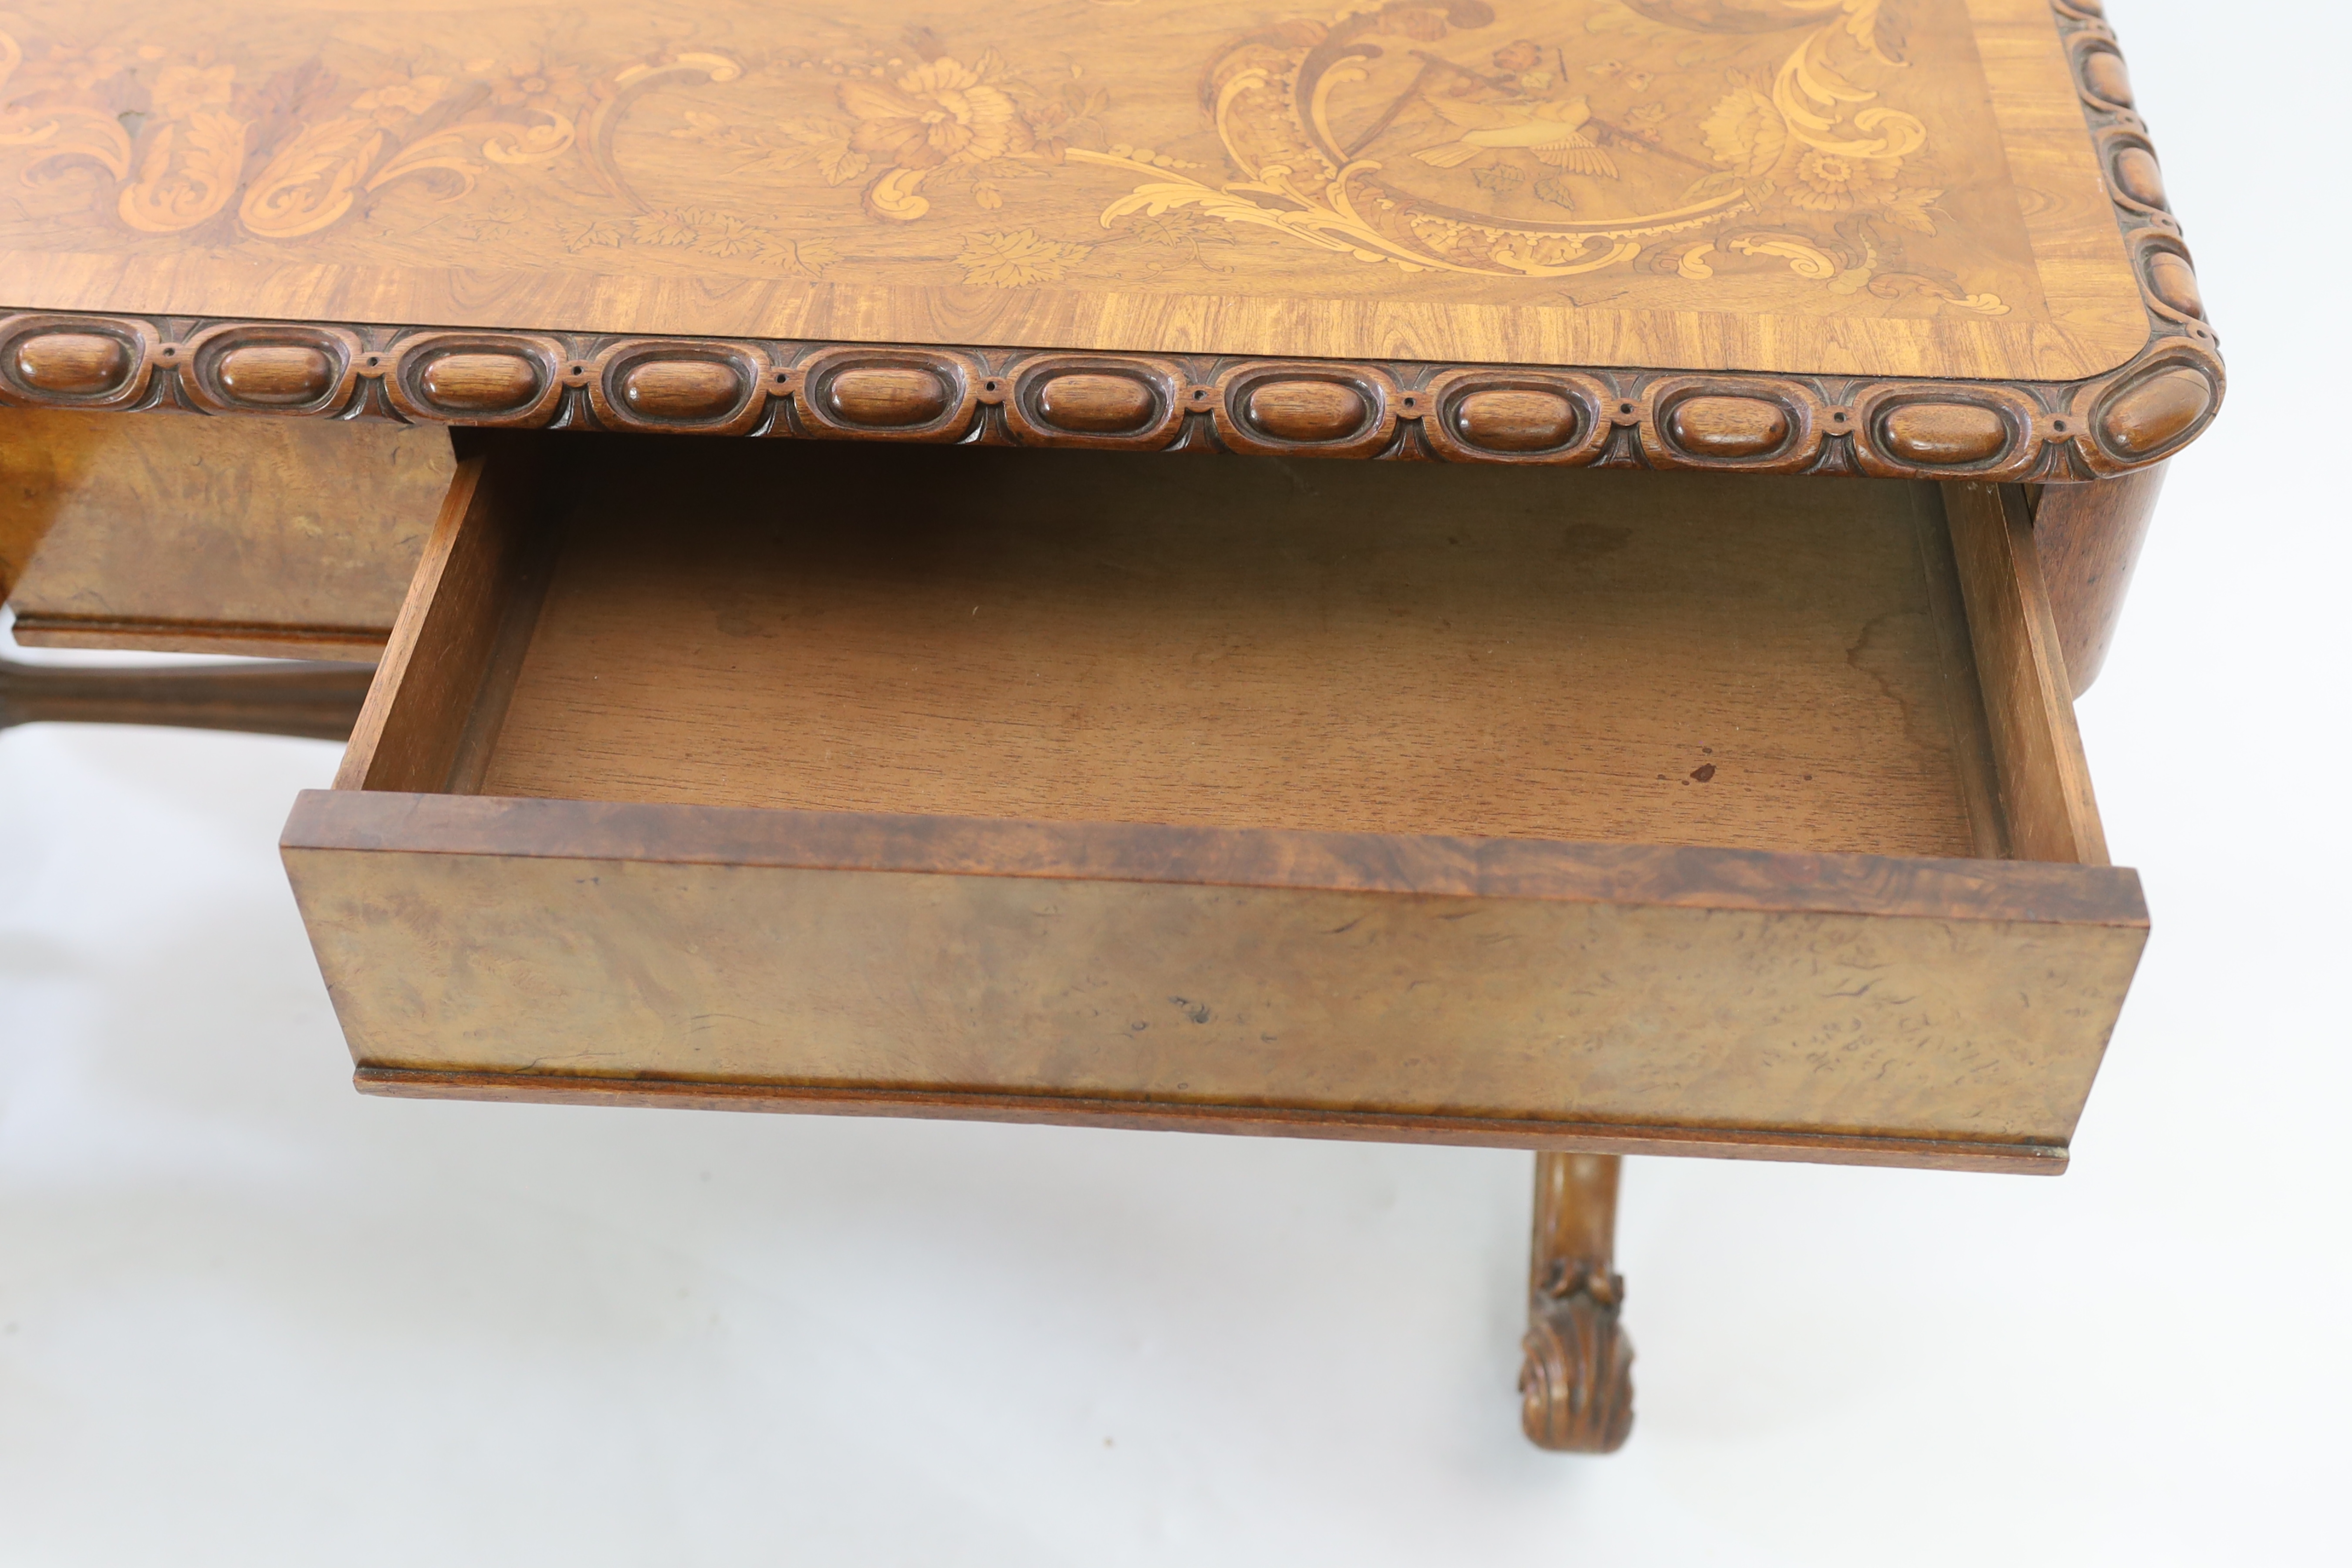 A William IV marquetry inlaid walnut library table